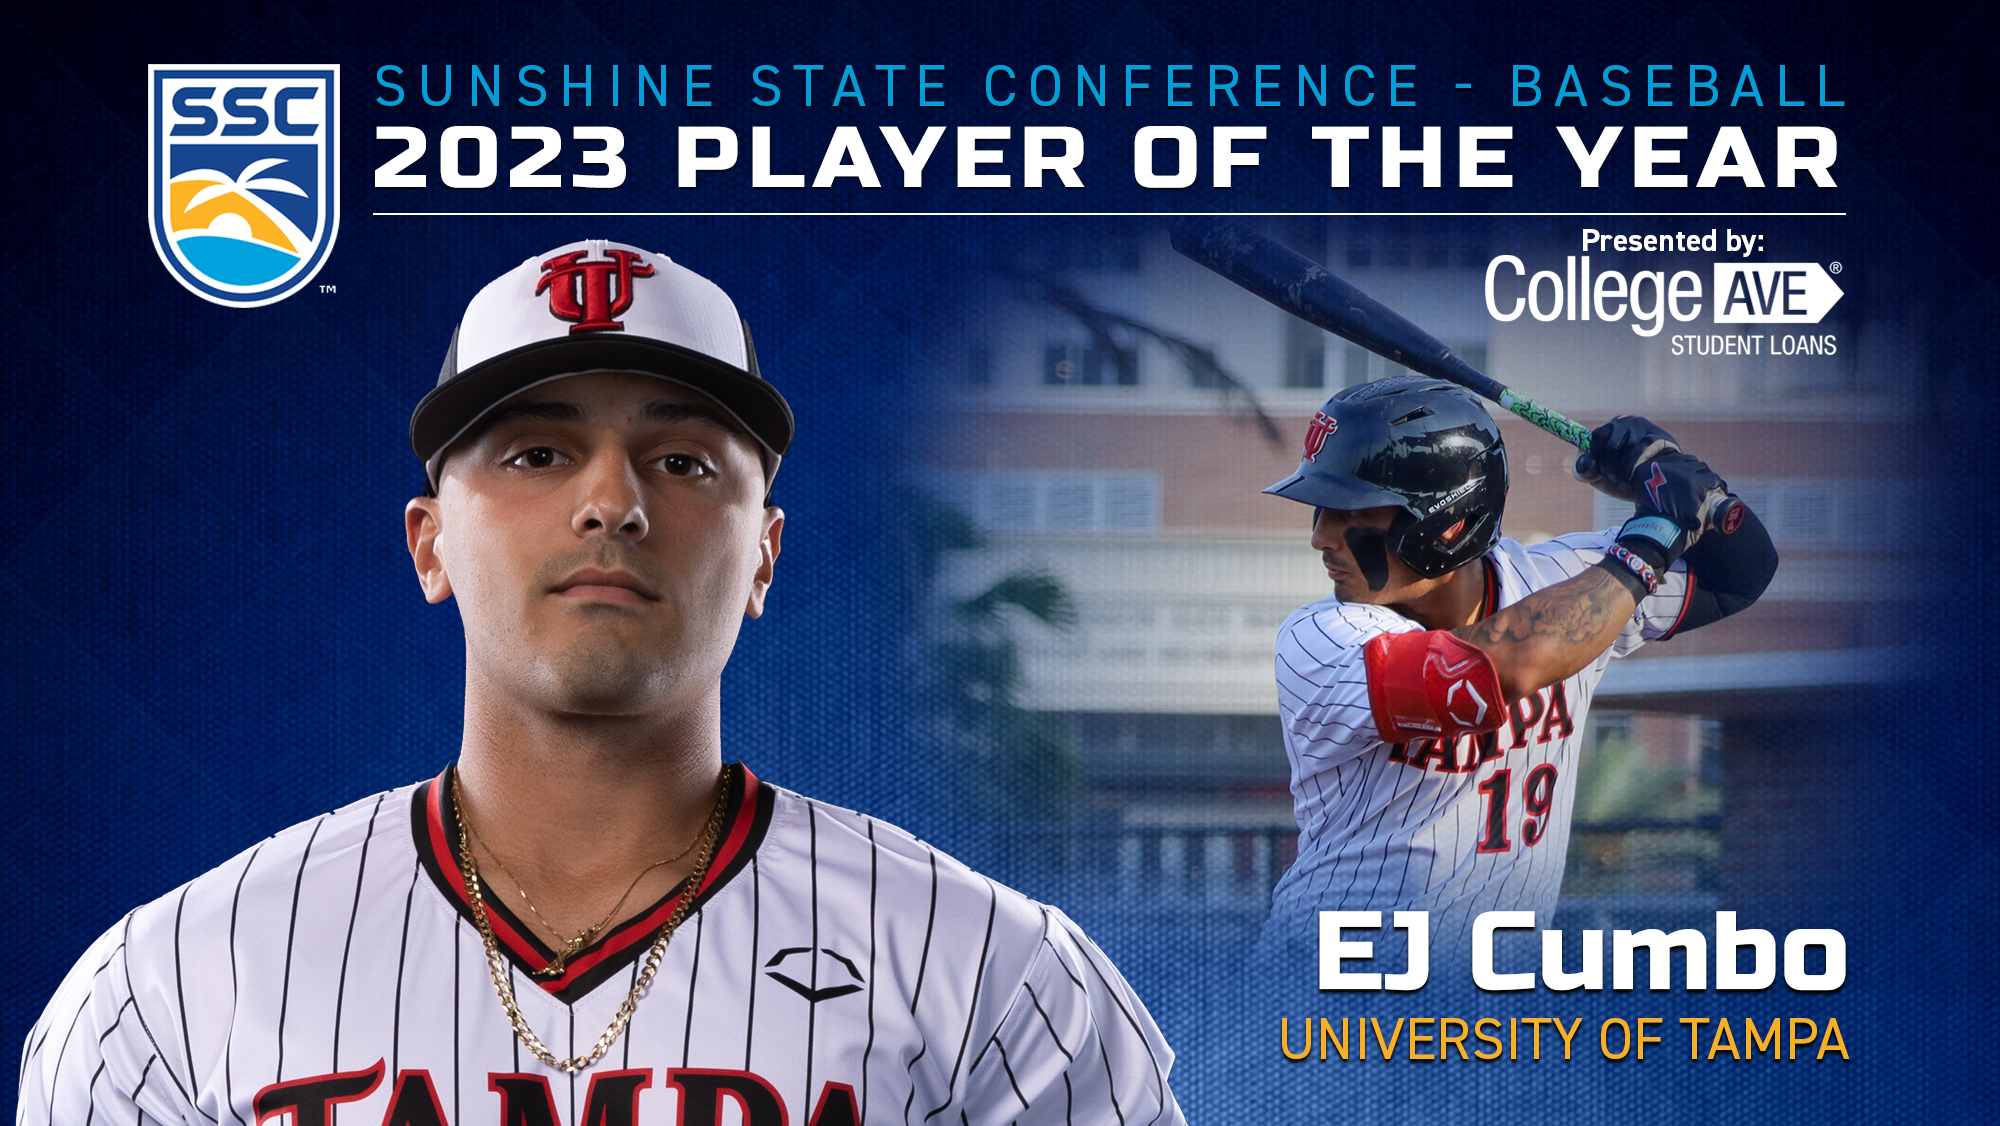 SSC Player of the Year E.J. Cumbo